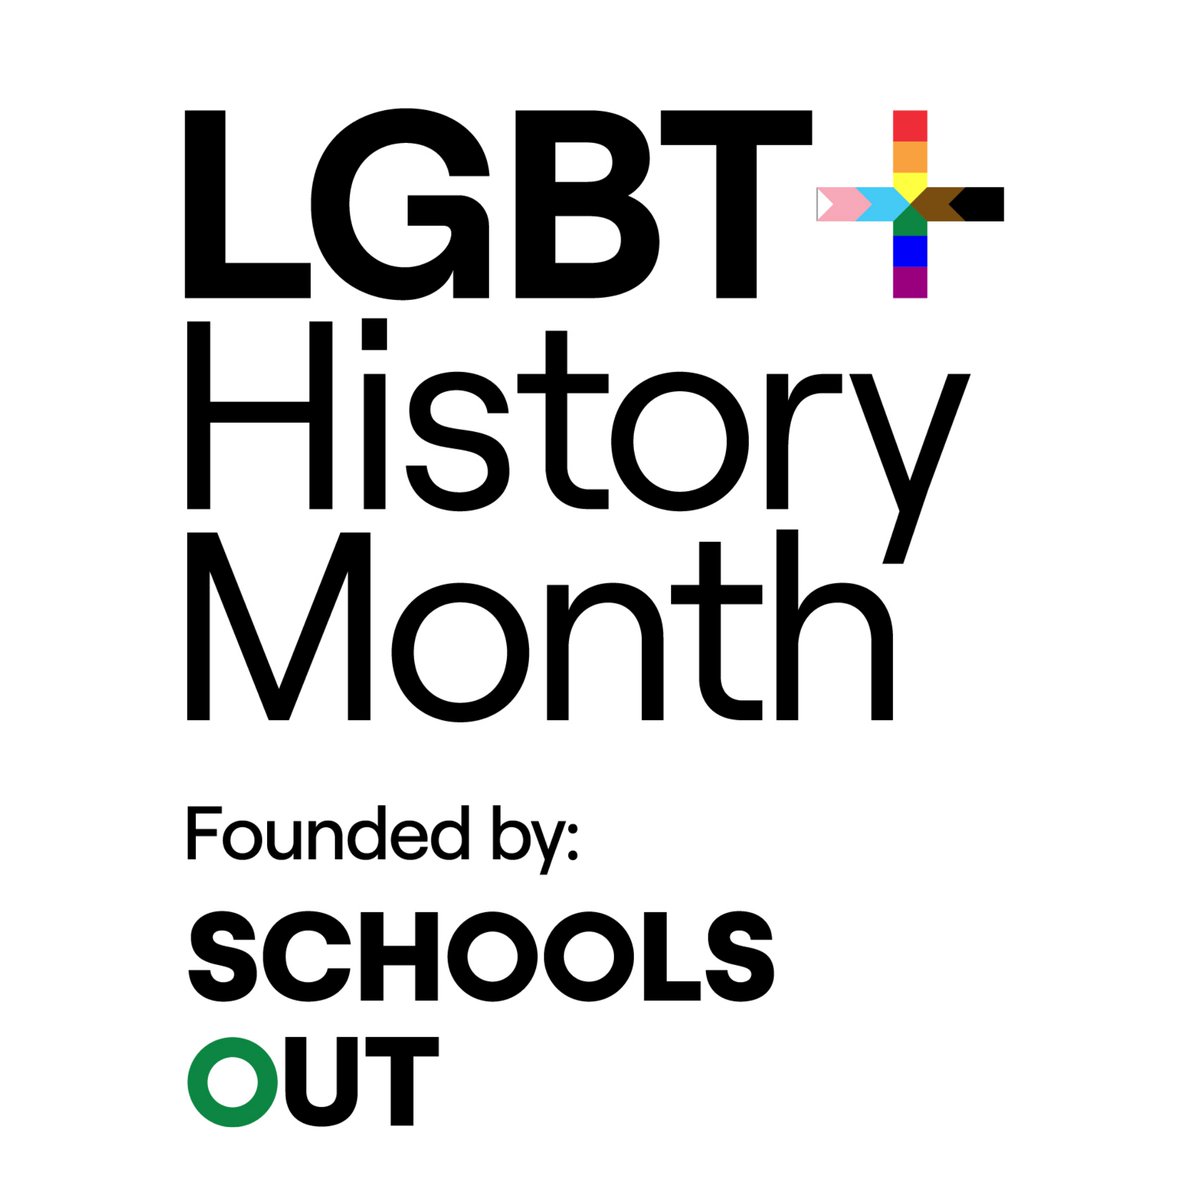 February is LGBTQ+ History Month 🌈
Over the course of the month, we’ll be sharing with you some updates to our collections we’ve been making to better represent North Lincolnshire’s’ LGBTQ+ history.

#LGBTplusHM #LGBTQIA #Usualise #QueerHistory #Museum #NorthLincolnshireMuseum